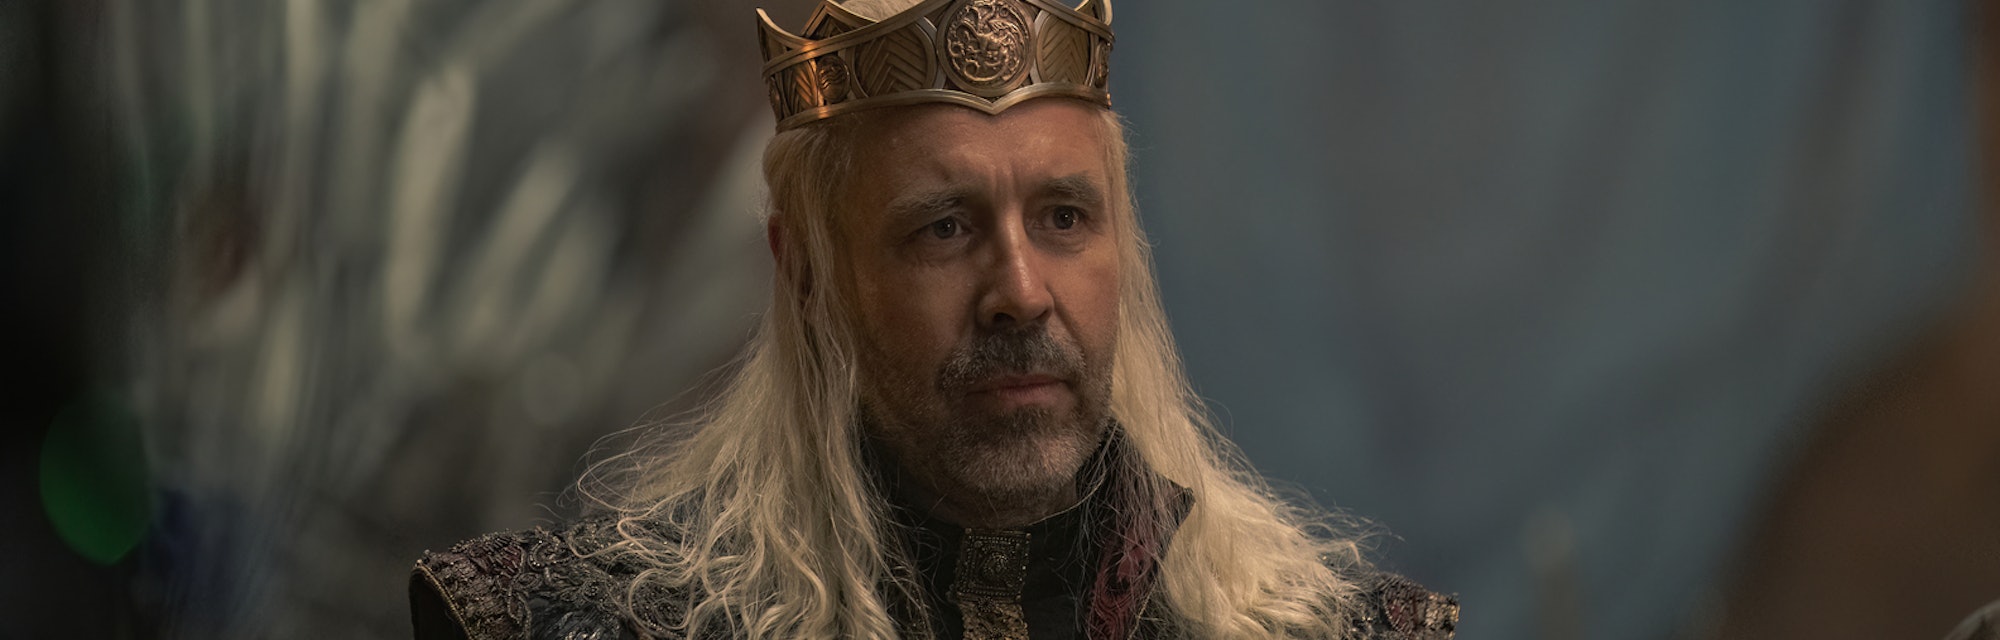 King Viserys I Targaryen (Paddy Considine) sits at a banquet table in House of the Dragon Episode 5